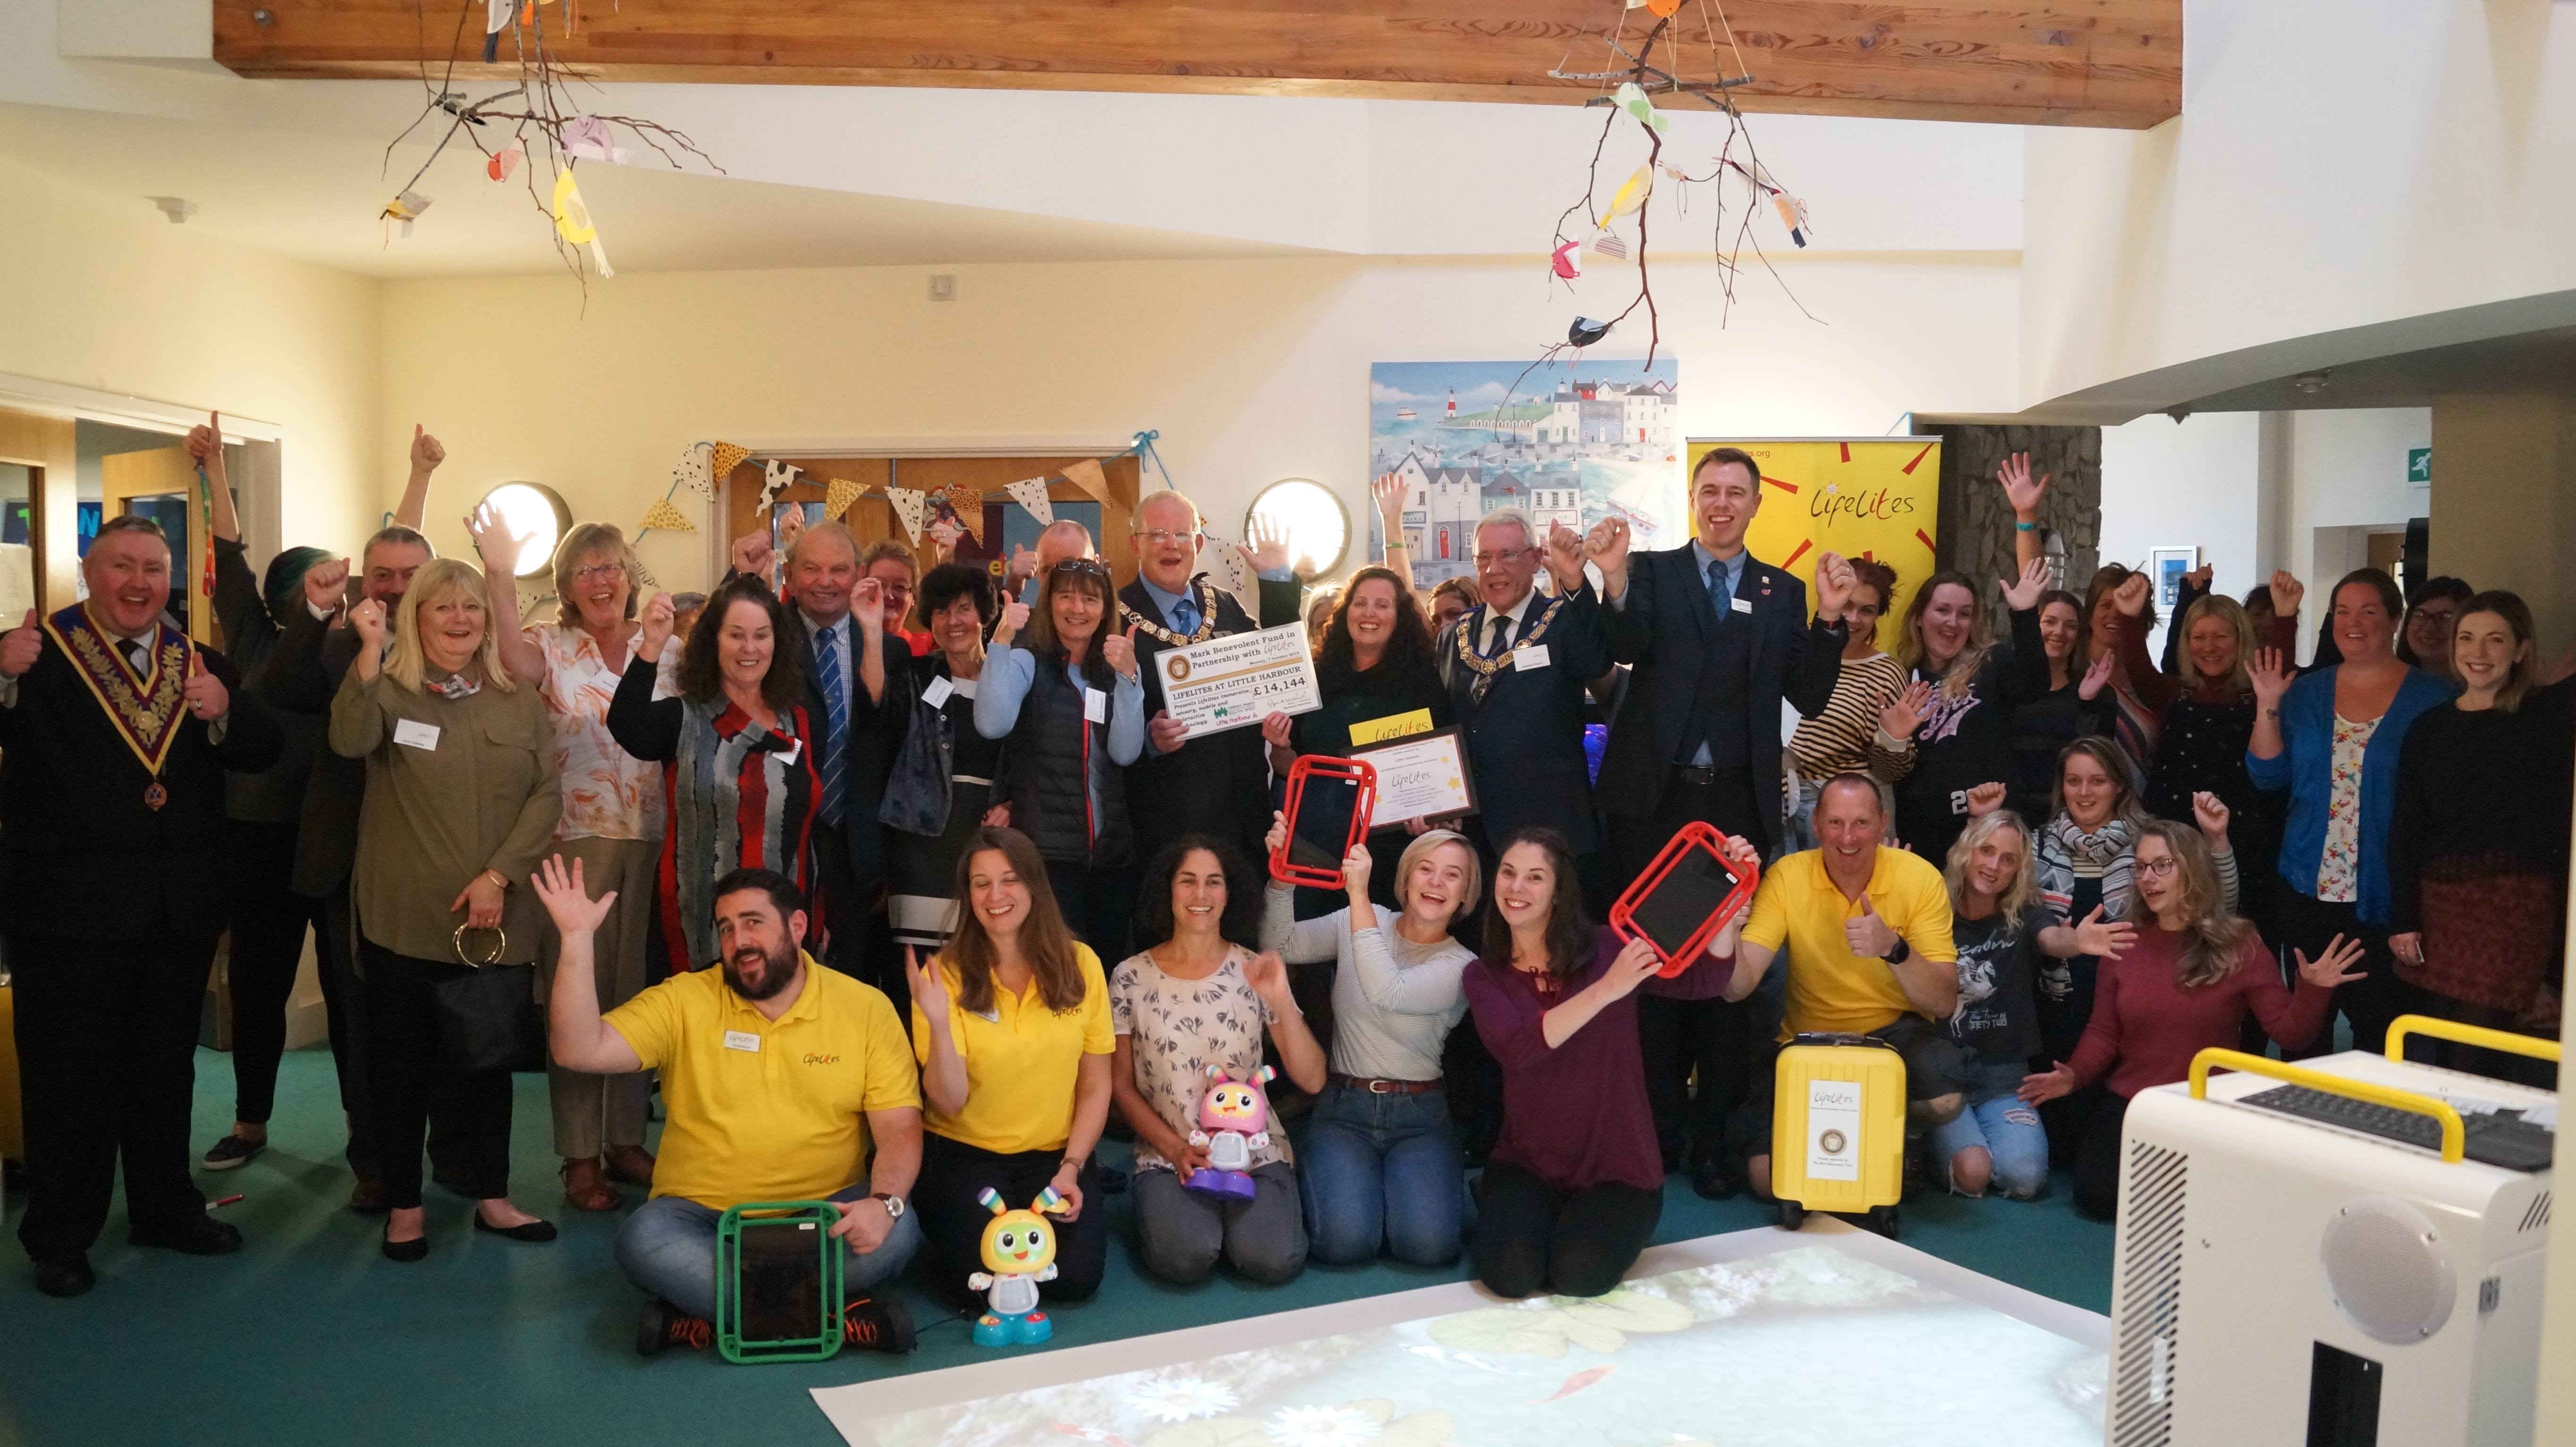 Lifelites partners with the world's biggest games charity event